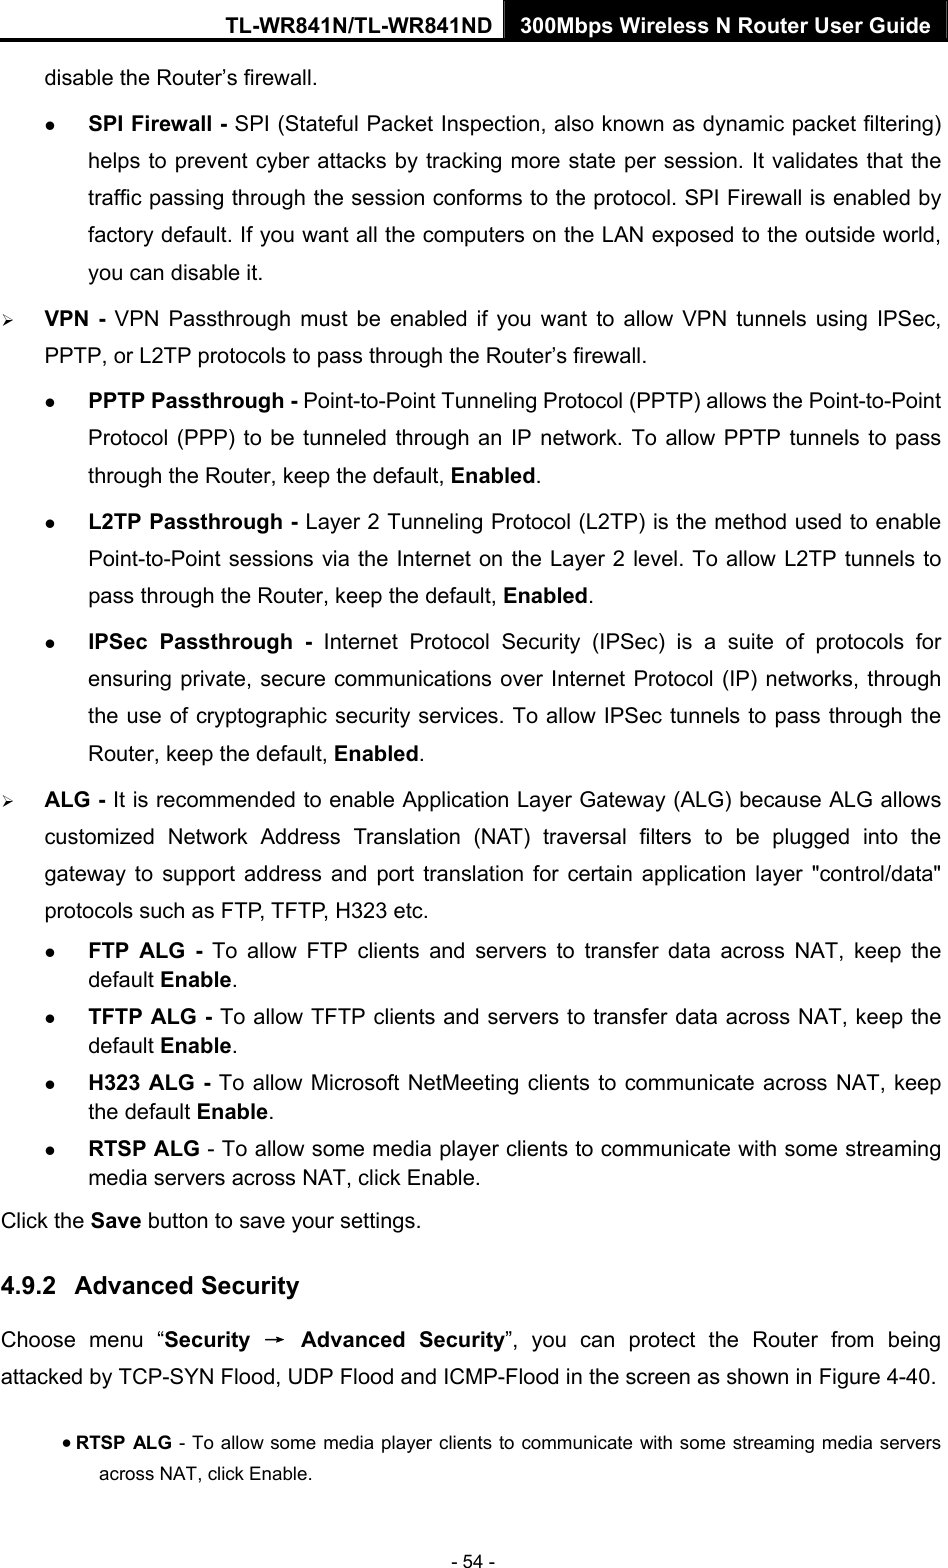 TL-WR841N/TL-WR841ND 300Mbps Wireless N Router User Guide - 54 - disable the Router’s firewall. z SPI Firewall - SPI (Stateful Packet Inspection, also known as dynamic packet filtering) helps to prevent cyber attacks by tracking more state per session. It validates that the traffic passing through the session conforms to the protocol. SPI Firewall is enabled by factory default. If you want all the computers on the LAN exposed to the outside world, you can disable it.   ¾ VPN - VPN Passthrough must be enabled if you want to allow VPN tunnels using IPSec, PPTP, or L2TP protocols to pass through the Router’s firewall. z PPTP Passthrough - Point-to-Point Tunneling Protocol (PPTP) allows the Point-to-Point Protocol (PPP) to be tunneled through an IP network. To allow PPTP tunnels to pass through the Router, keep the default, Enabled.  z L2TP Passthrough - Layer 2 Tunneling Protocol (L2TP) is the method used to enable Point-to-Point sessions via the Internet on the Layer 2 level. To allow L2TP tunnels to pass through the Router, keep the default, Enabled. z IPSec Passthrough - Internet Protocol Security (IPSec) is a suite of protocols for ensuring private, secure communications over Internet Protocol (IP) networks, through the use of cryptographic security services. To allow IPSec tunnels to pass through the Router, keep the default, Enabled. ¾ ALG - It is recommended to enable Application Layer Gateway (ALG) because ALG allows customized Network Address Translation (NAT) traversal filters to be plugged into the gateway to support address and port translation for certain application layer &quot;control/data&quot; protocols such as FTP, TFTP, H323 etc.   z FTP ALG - To allow FTP clients and servers to transfer data across NAT, keep the default Enable.   z TFTP ALG - To allow TFTP clients and servers to transfer data across NAT, keep the default Enable. z H323 ALG - To allow Microsoft NetMeeting clients to communicate across NAT, keep the default Enable. z RTSP ALG - To allow some media player clients to communicate with some streaming media servers across NAT, click Enable.   Click the Save button to save your settings. 4.9.2  Advanced Security Choose menu “Security  → Advanced Security”, you can protect the Router from being attacked by TCP-SYN Flood, UDP Flood and ICMP-Flood in the screen as shown in Figure 4-40.  • RTSP ALG - To allow some media player clients to communicate with some streaming media servers across NAT, click Enable.   